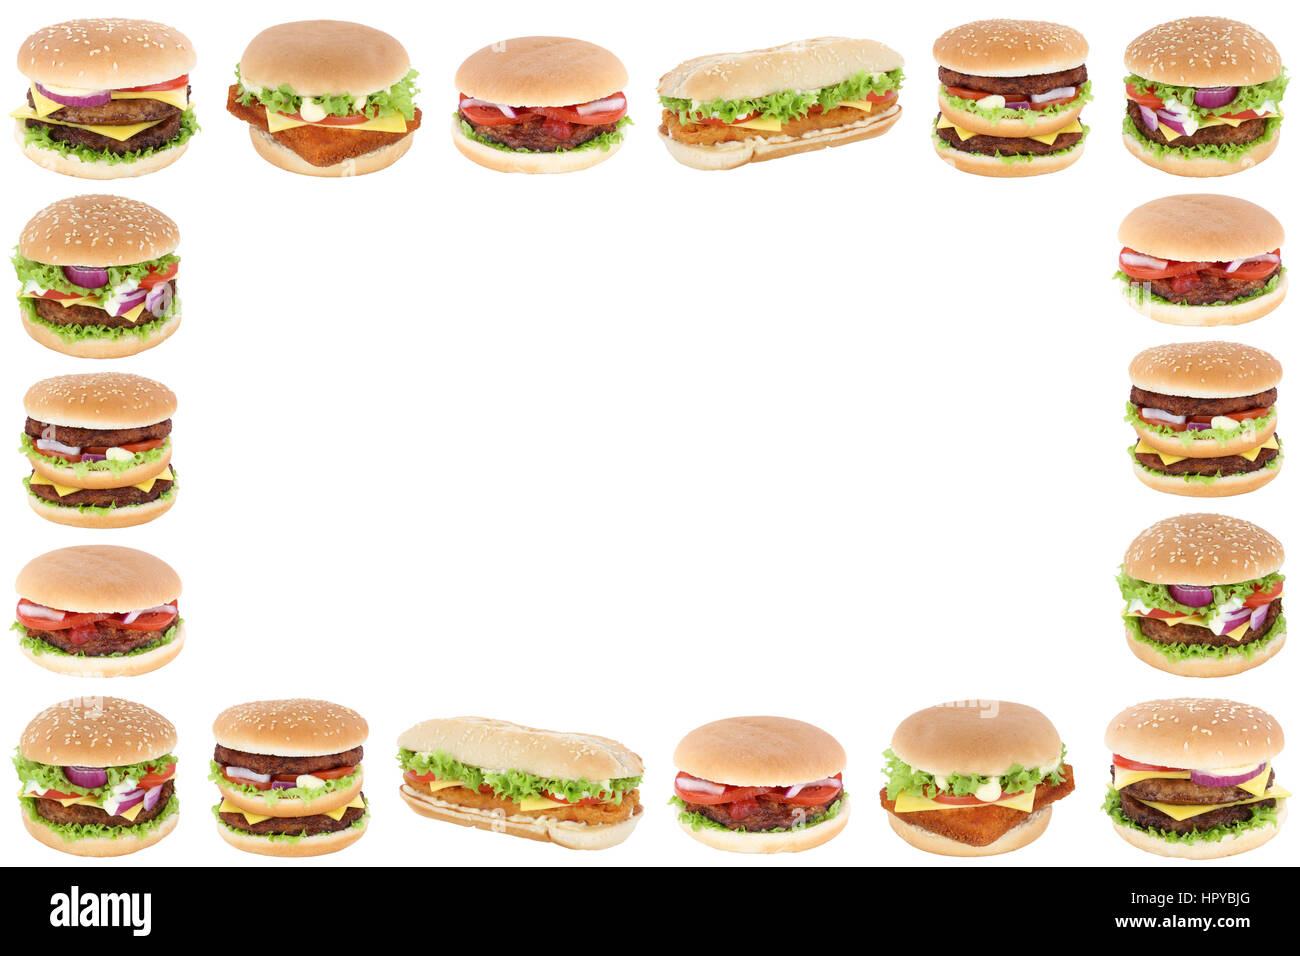 Hamburger cheeseburger burger fast food frame copyspace copy space on a white background Stock Photo